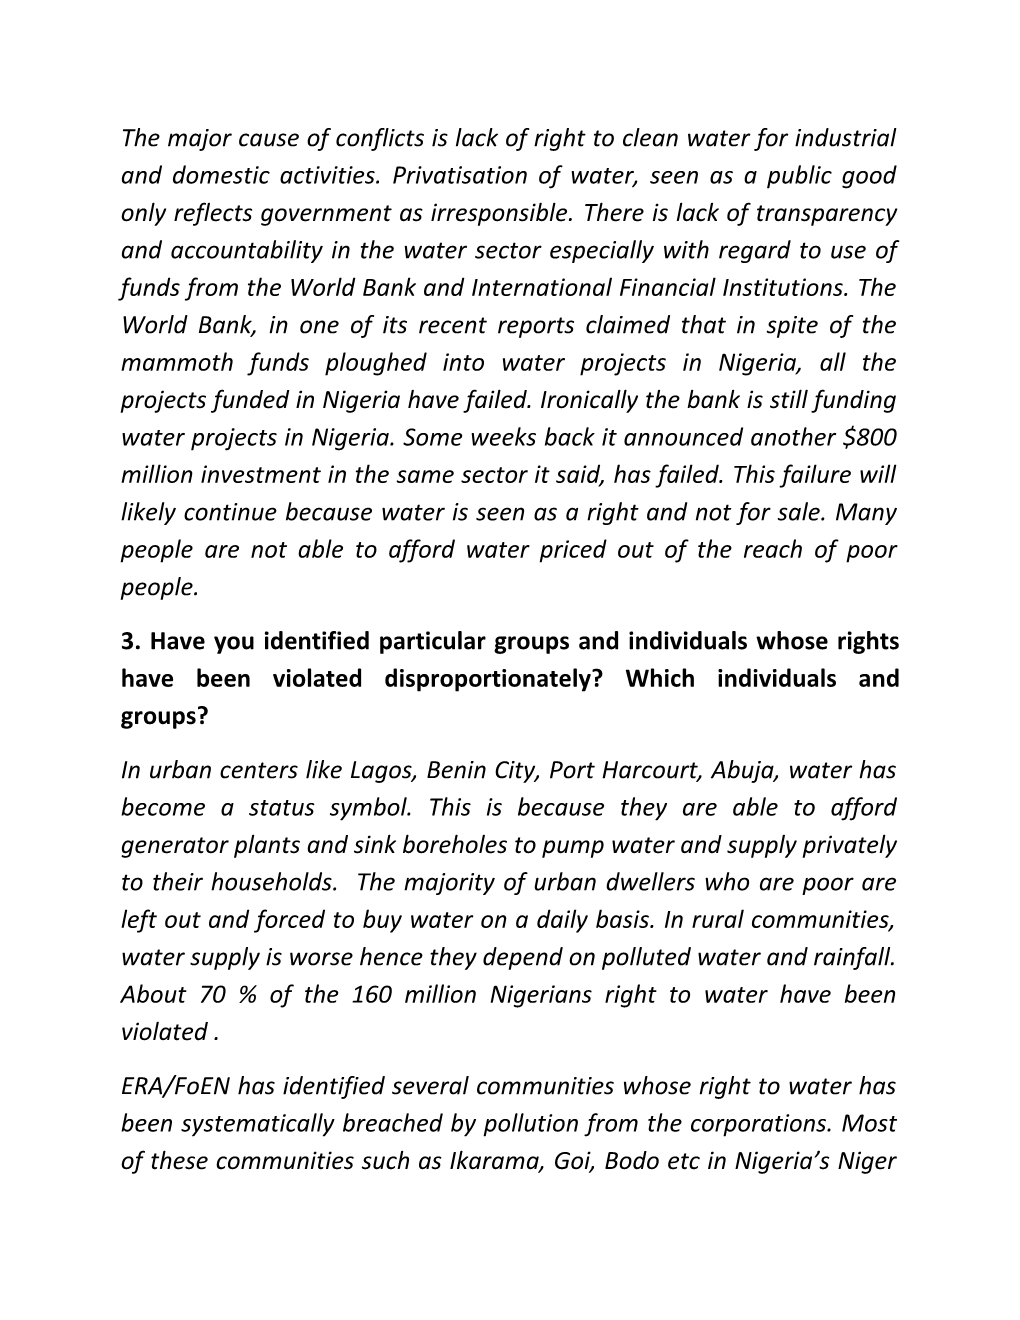 1. Have You Identified Any Violations of the Rights to Water And/Or Sanitation? If Yes